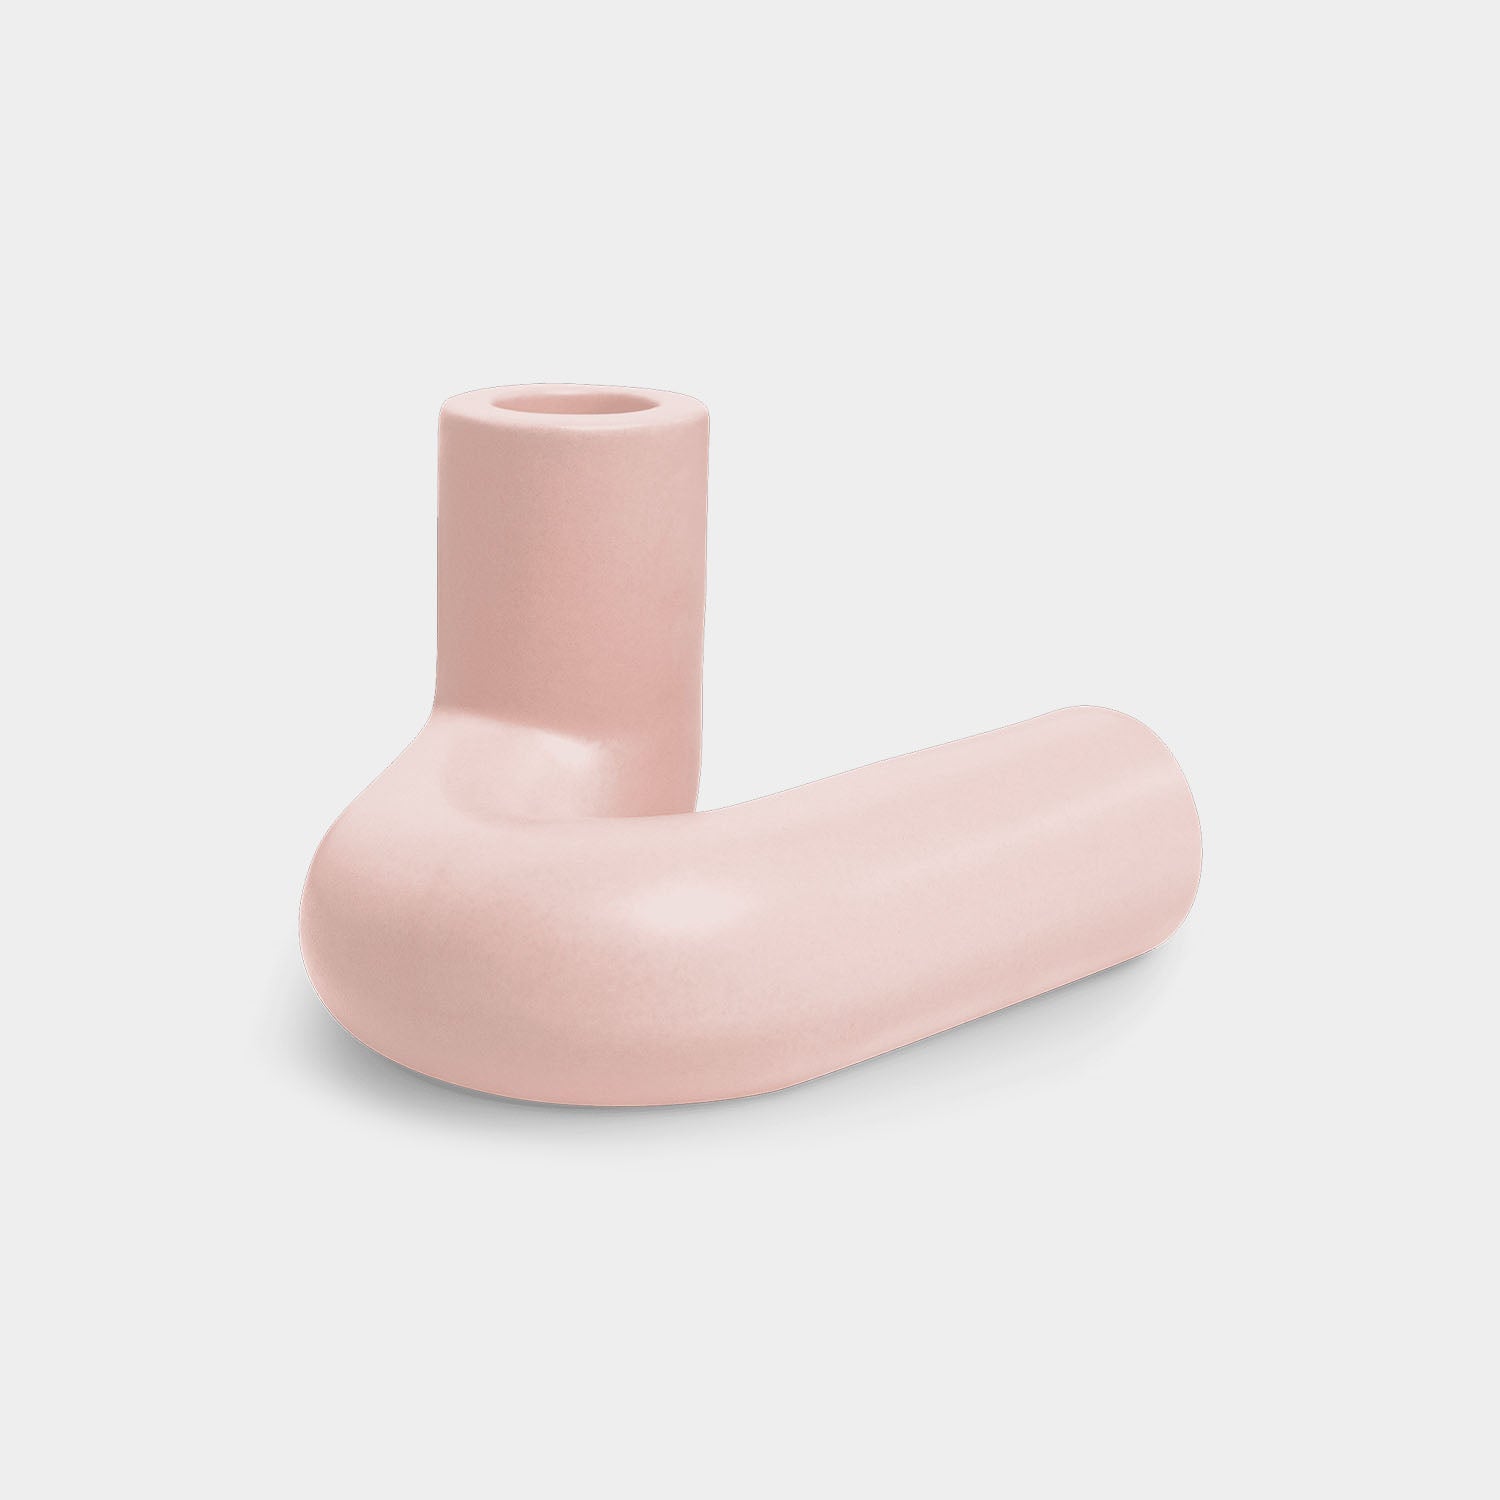 Templo Candle Holder in pink by OCTAEVO